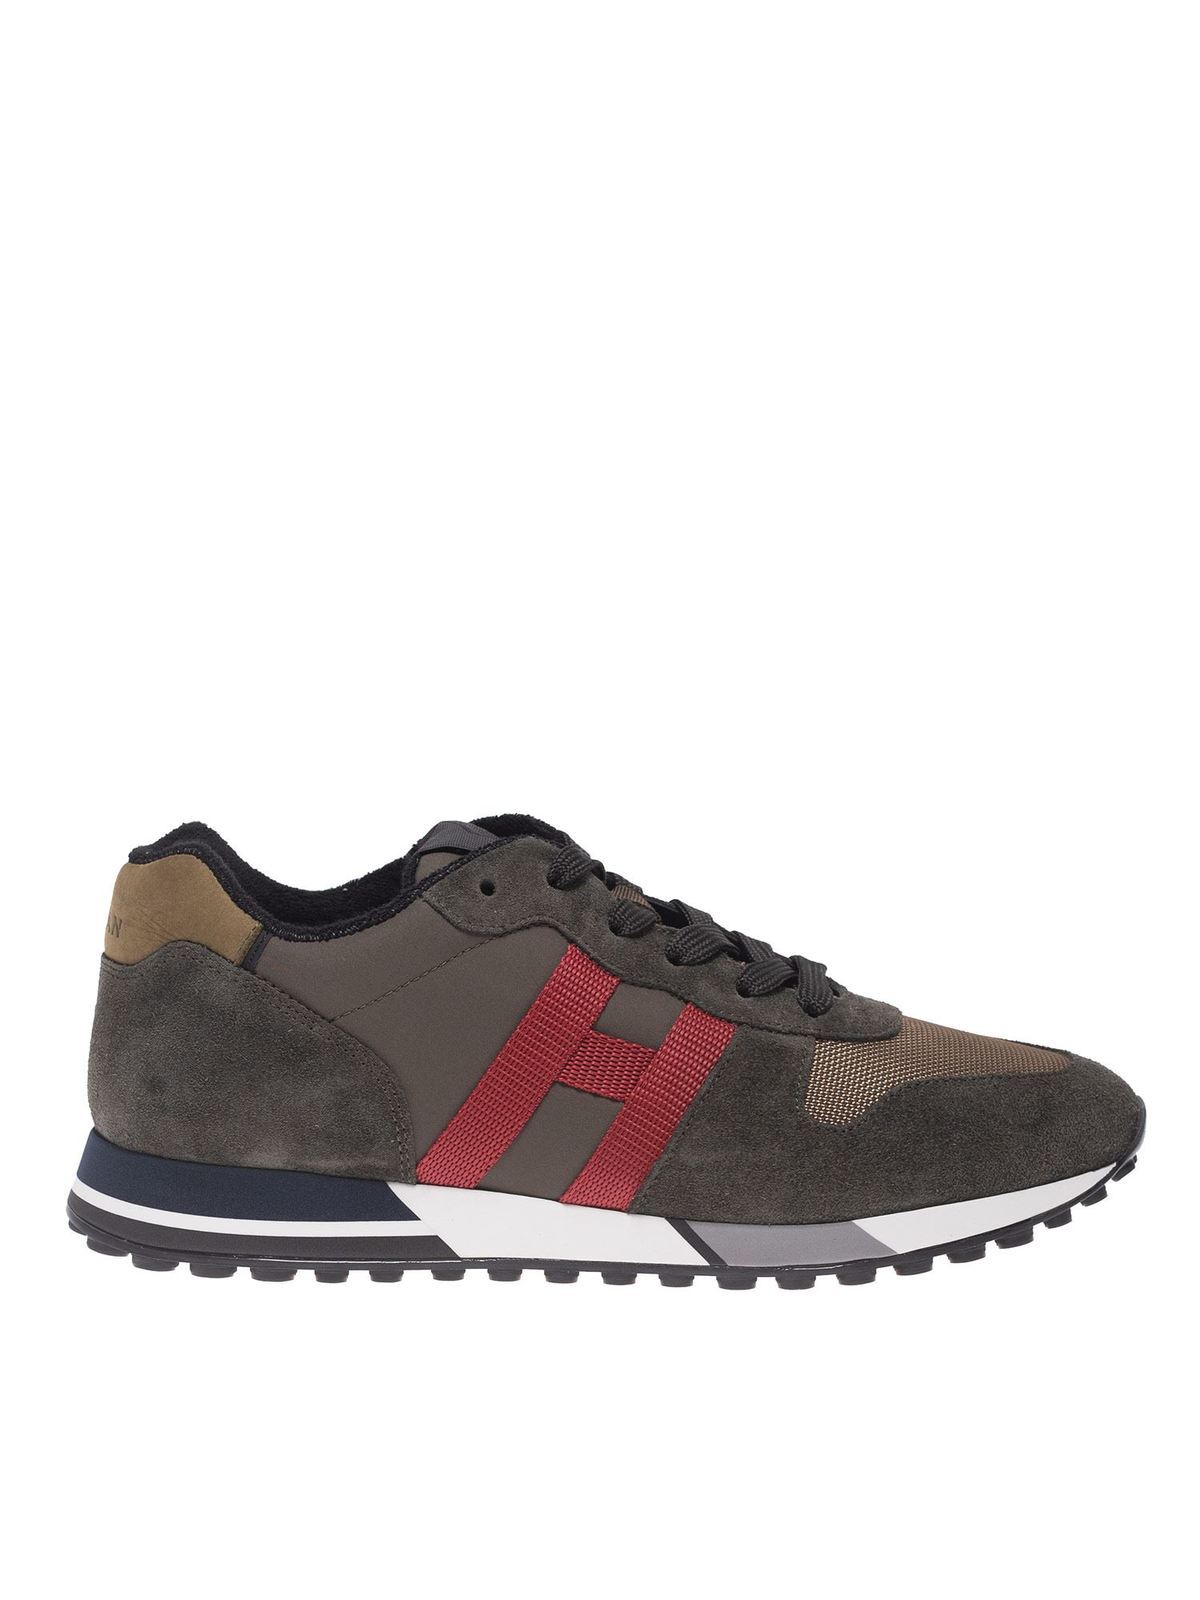 Hogan - H383 sneakers in green and red - trainers - HXM3830AN51OBZ813Y